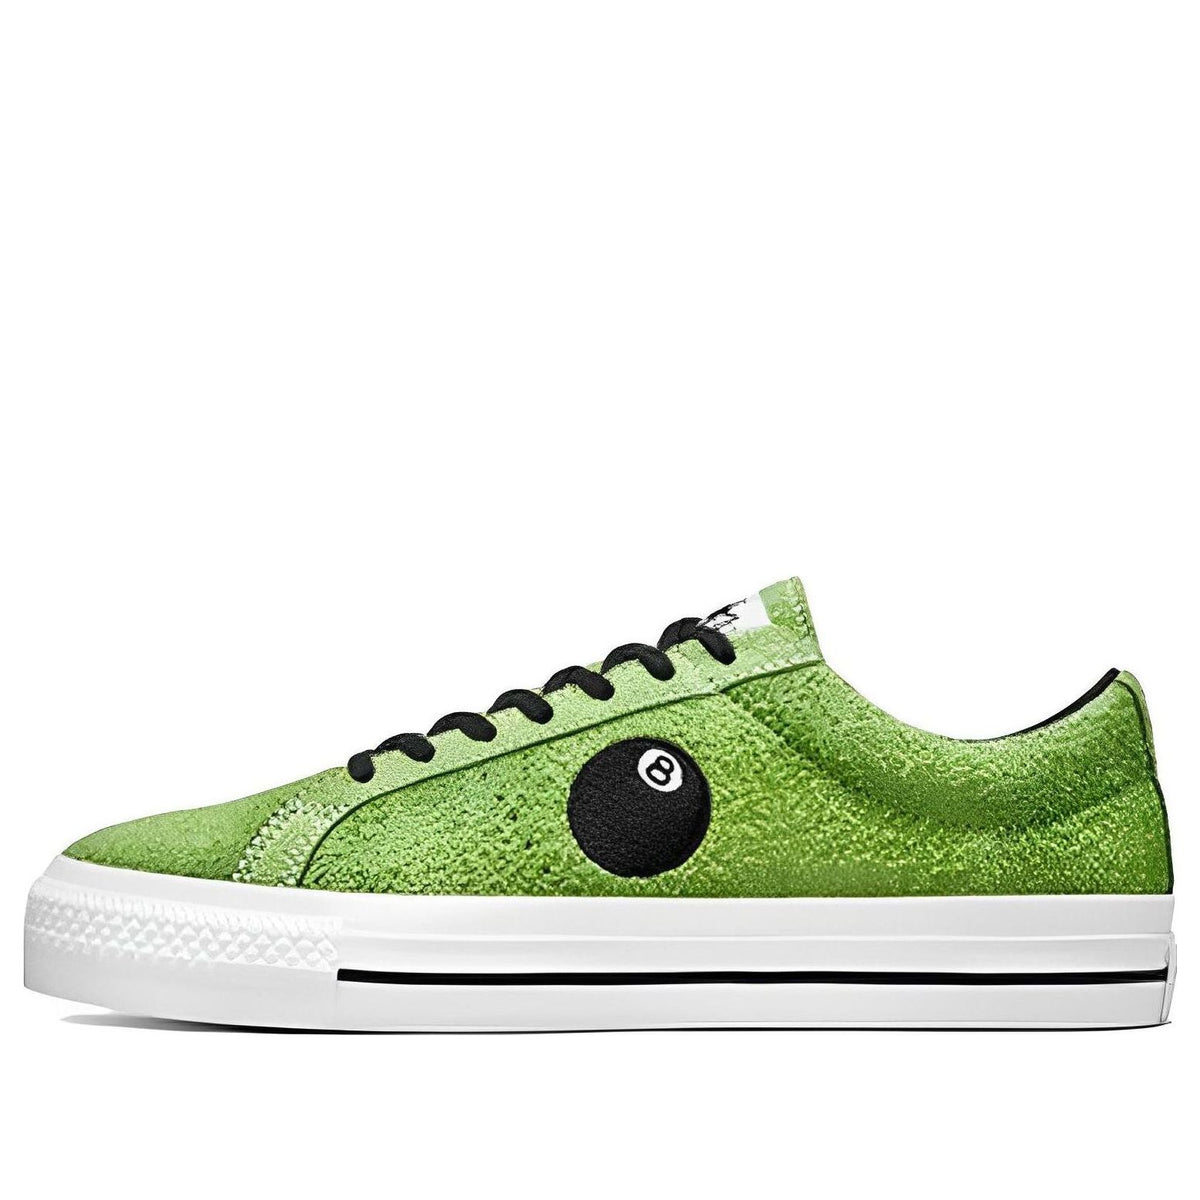 Converse Stussy x One Star Pro Low '8 Ball' A03712C